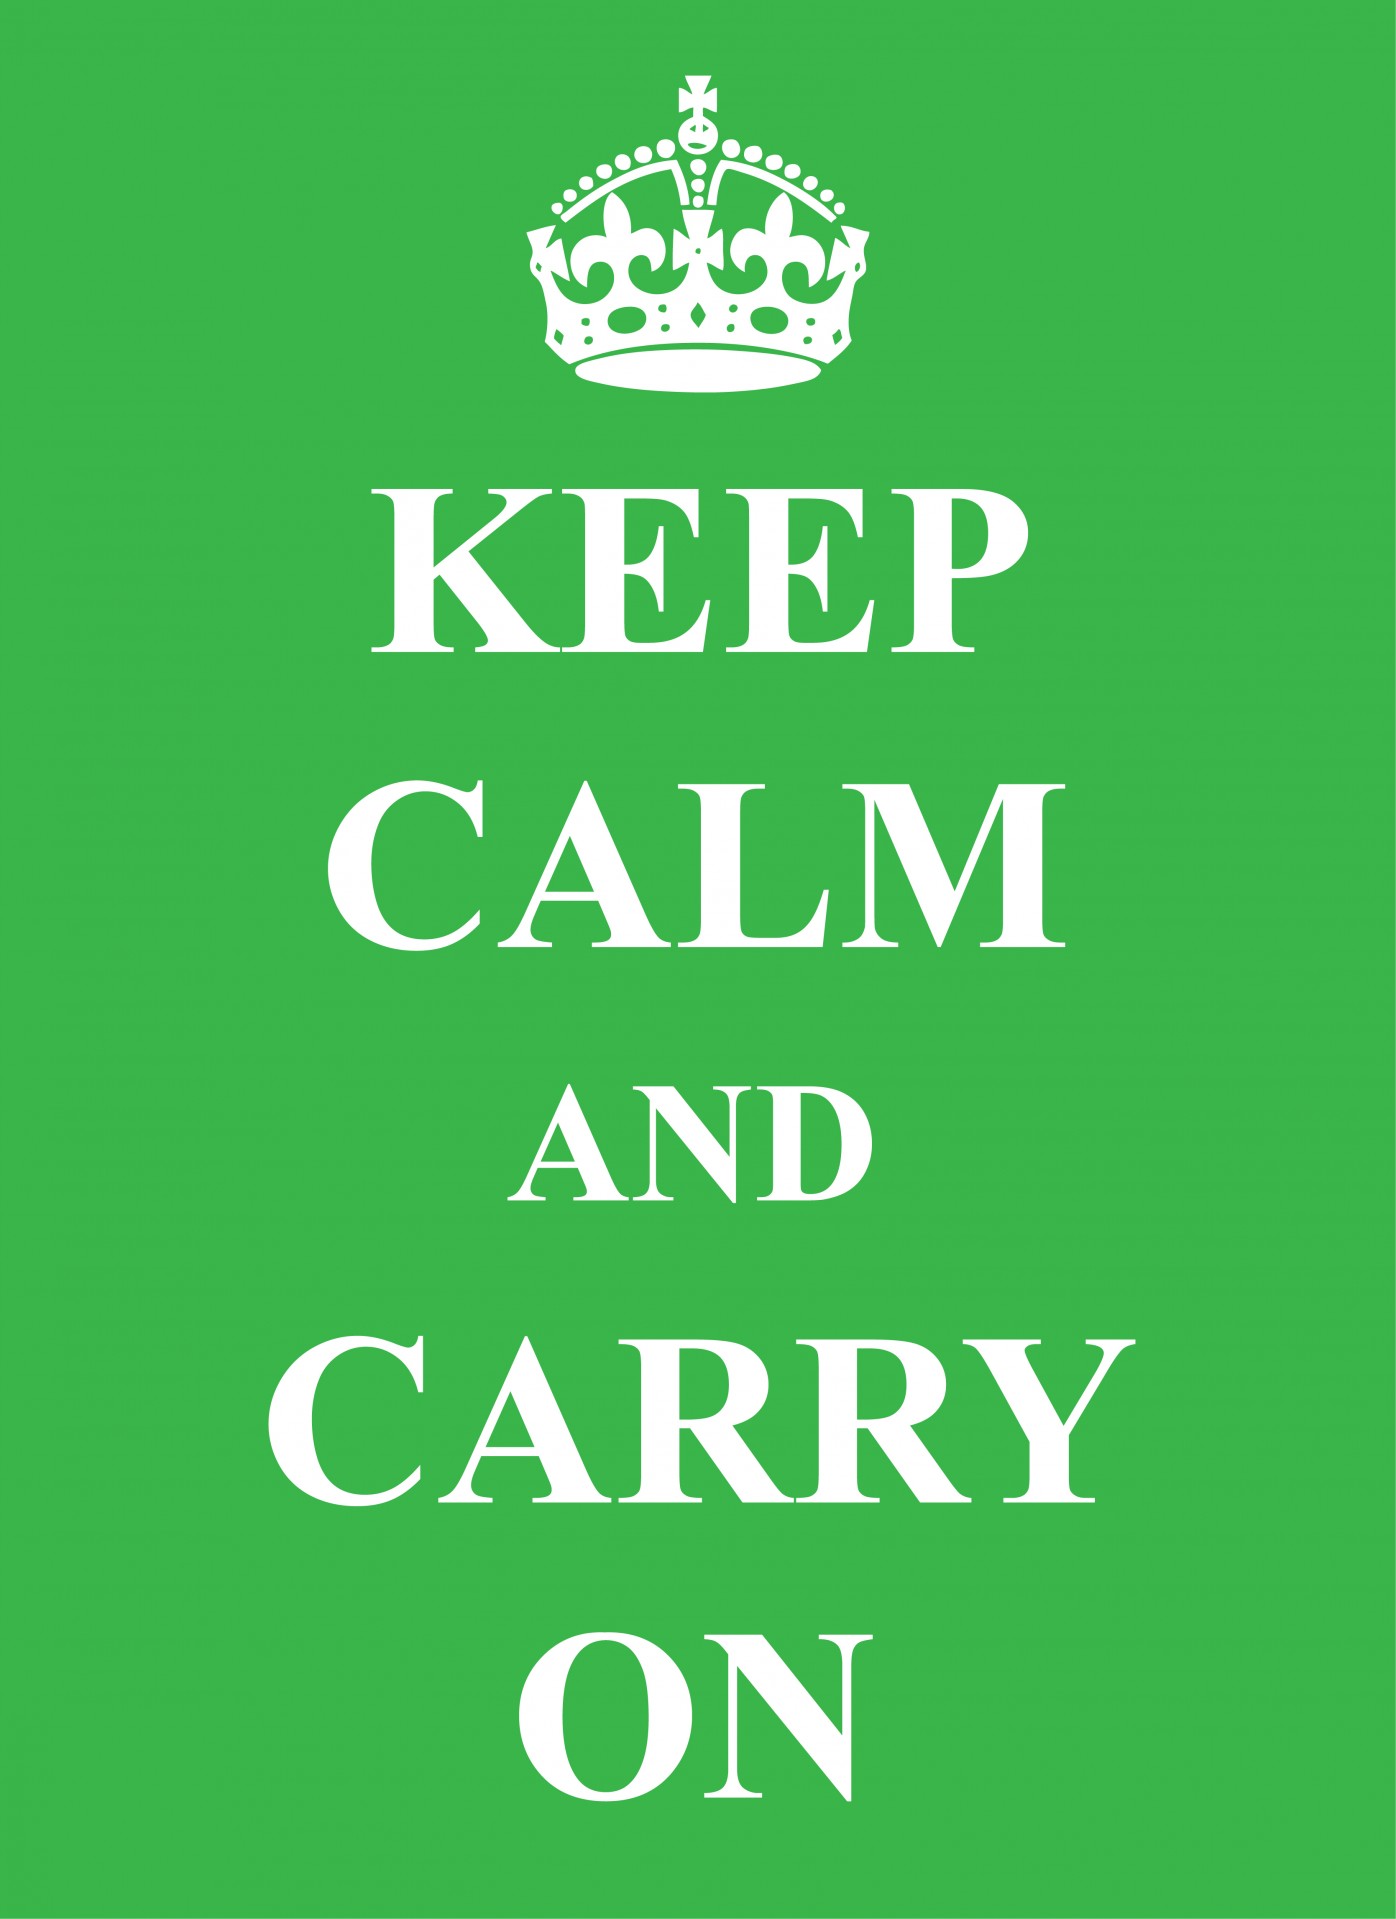 keep calm and carry on poster card free photo